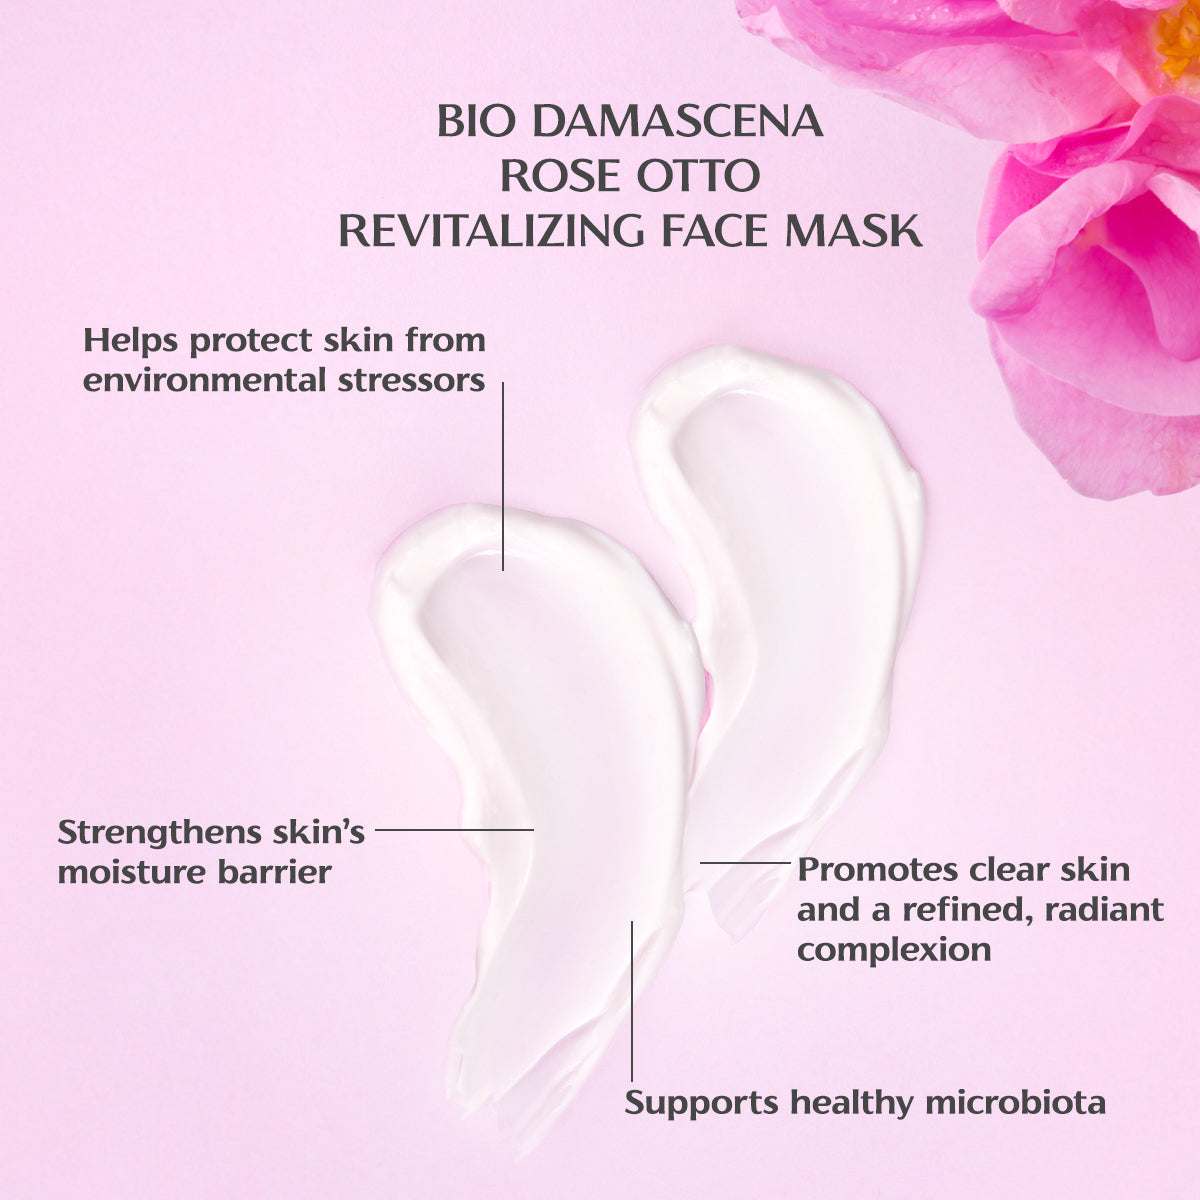 Product advertisement for BIO DAMASCENA ROSE OTTO REVITALIZING FACE MASK, highlighting benefits like environmental protection, moisture barrier enhancement, and support for healthy skin microbiota enriched with antioxidants.